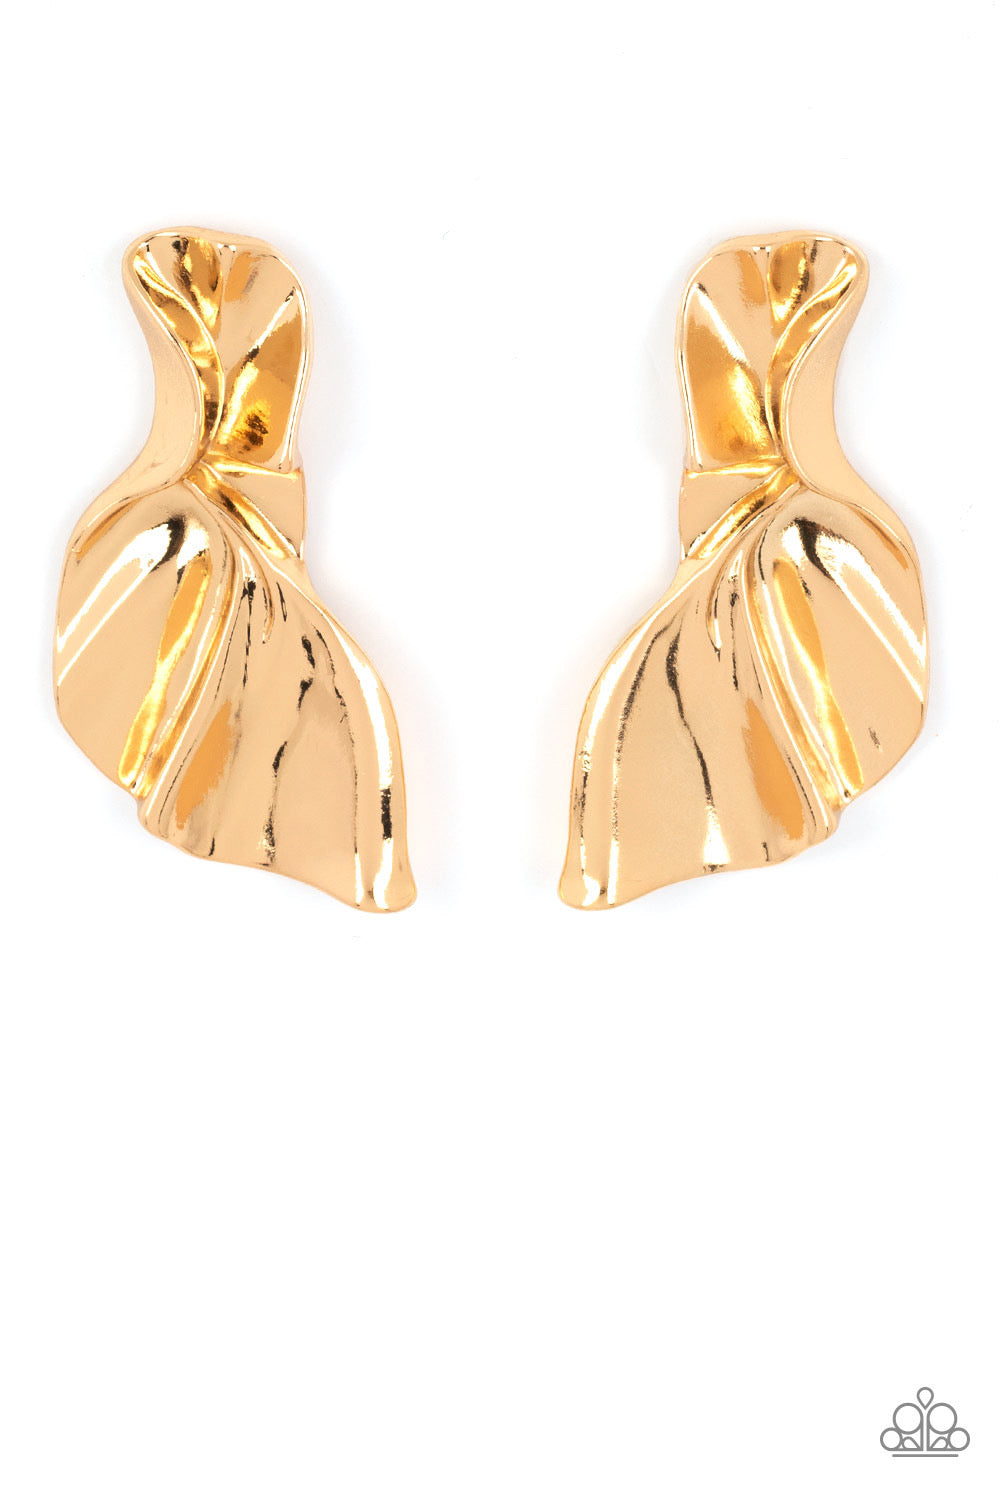 Paparazzi METAL-Physical Mood - Gold Earrings